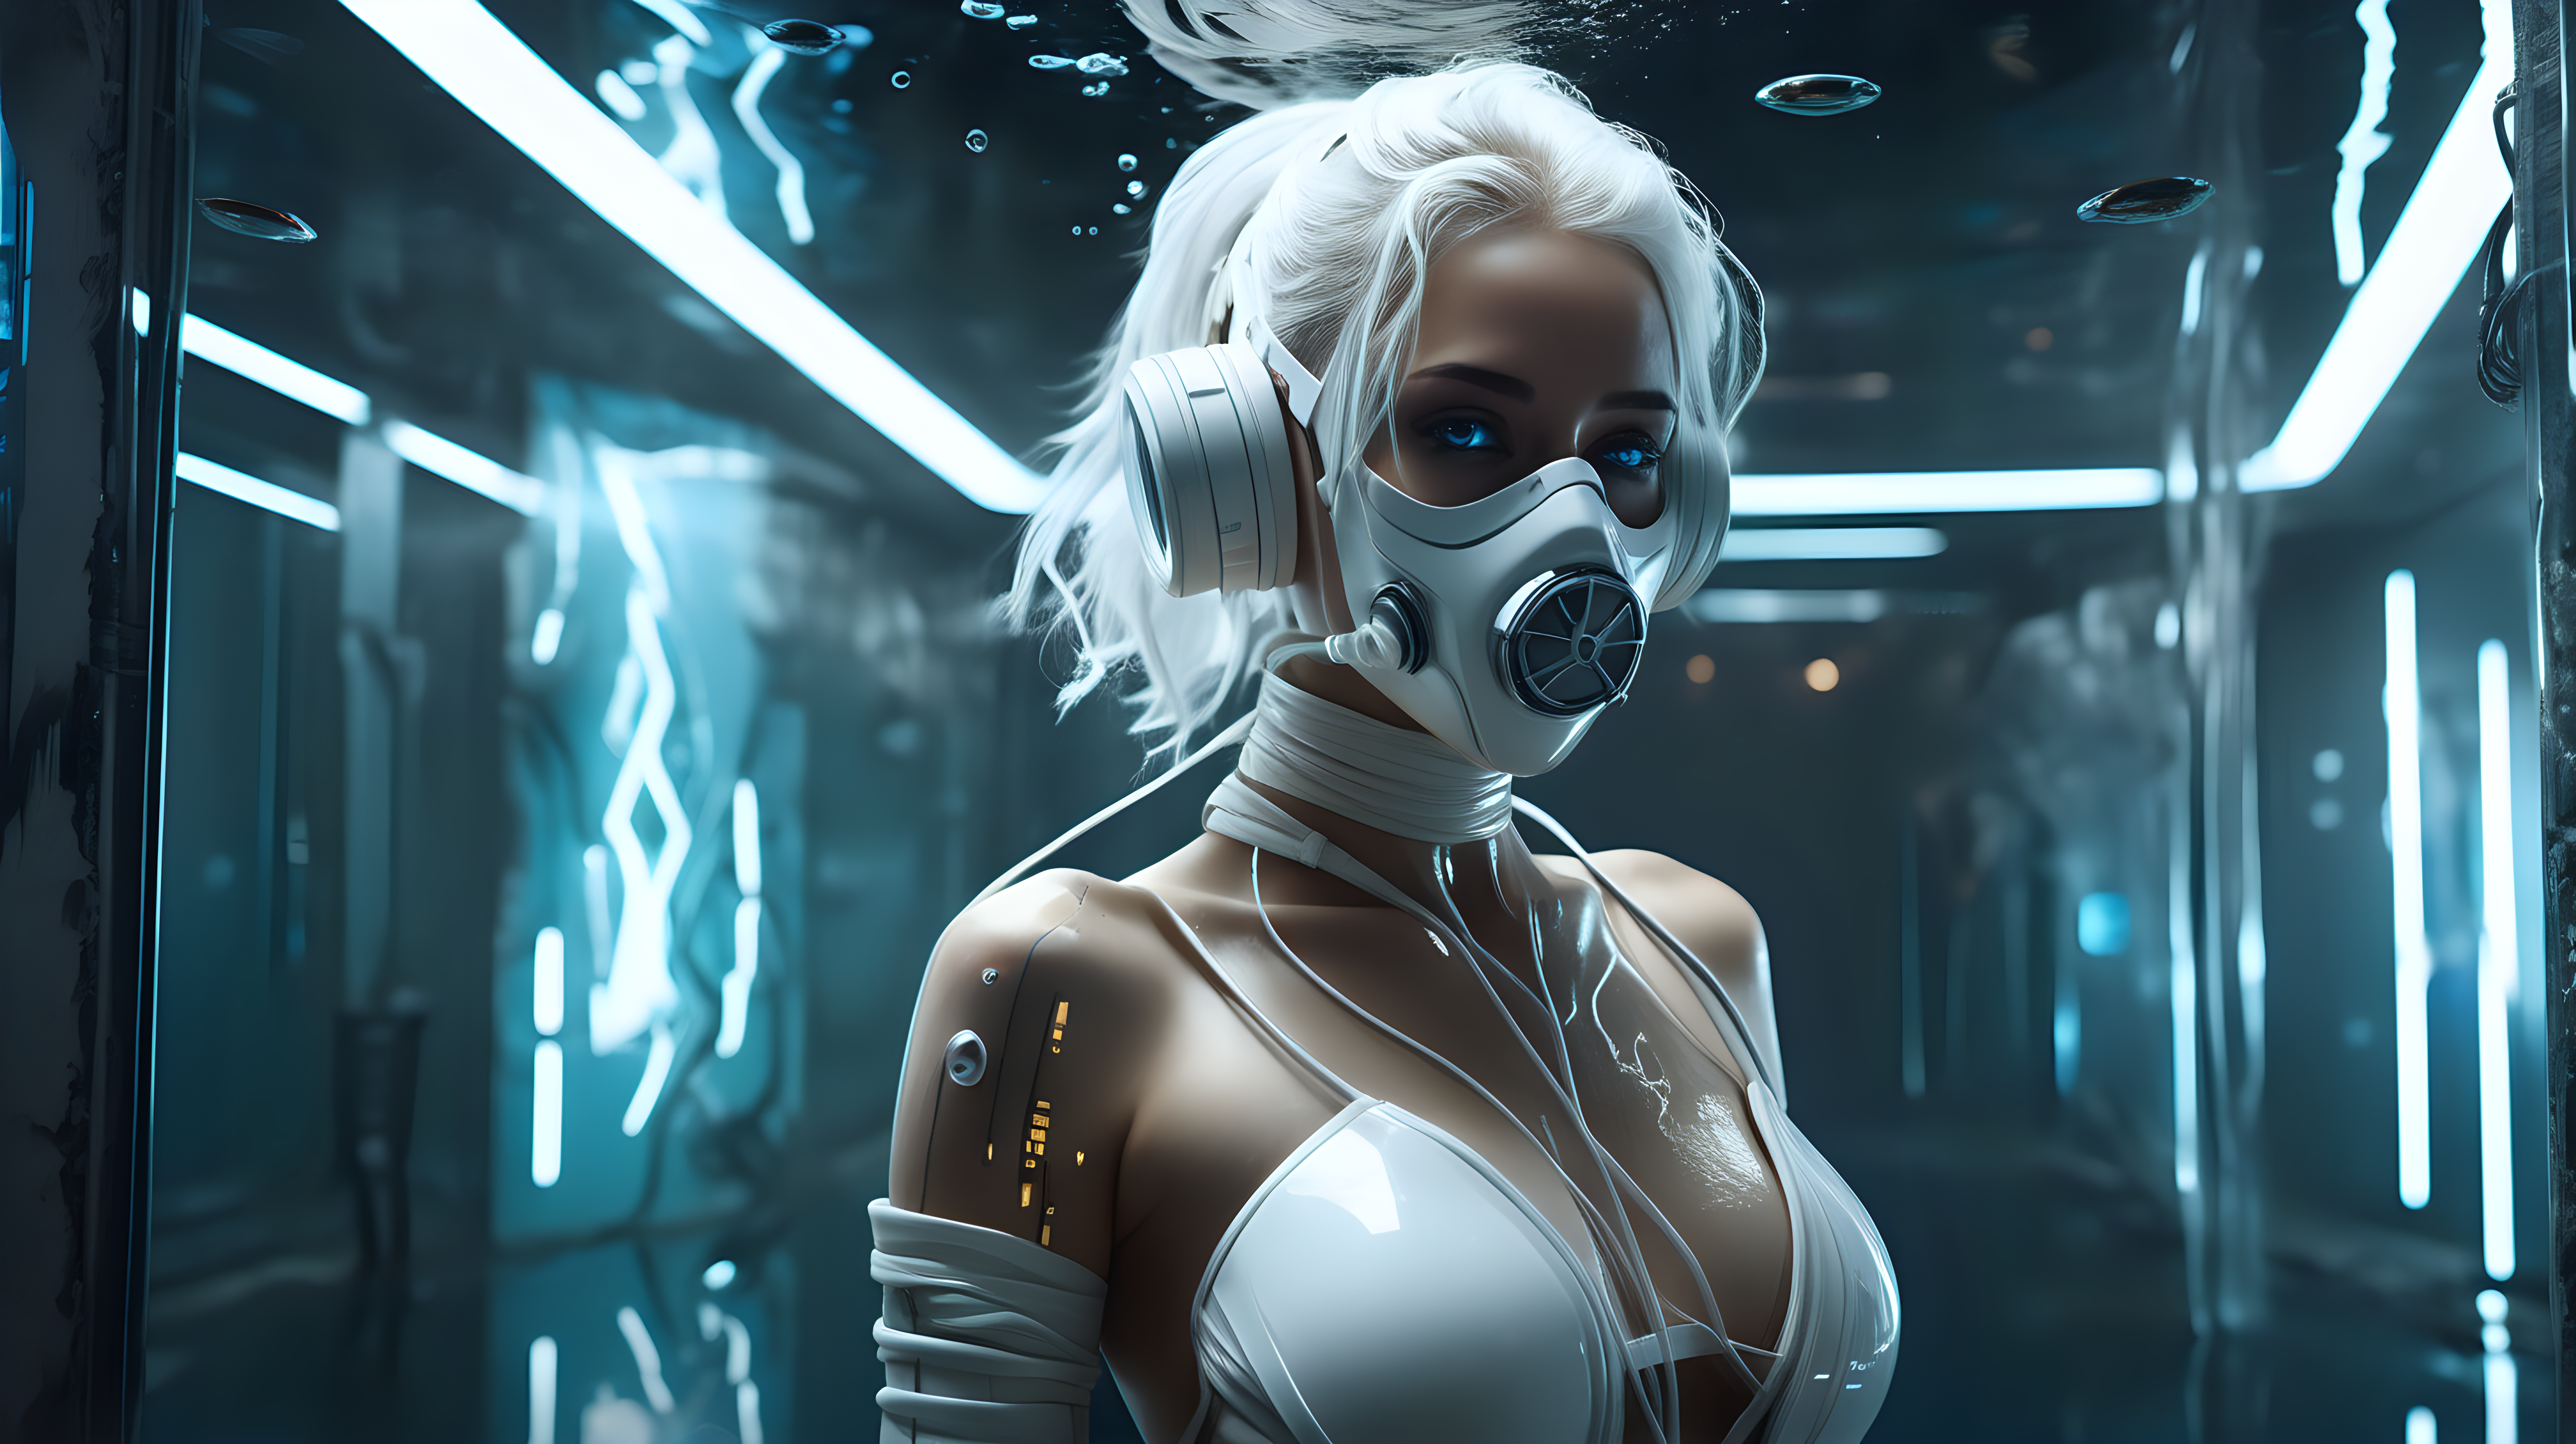 digital art, best quality, ultra realistic, ultimate detailed, sci-fi, centered composition, full-length body cinematic shot: stunning futuristic cyberpunk female, bandages cloathing, floating fully immersed and wired in a futuristic vertical healing chamber, underwater, sci-fi respirator mask, clear white eyes, detailed glass reflection, perfect woman forms, asymmetric white hair, gorgeous face, detailed natural skin, natural texture, diffused soft lighting